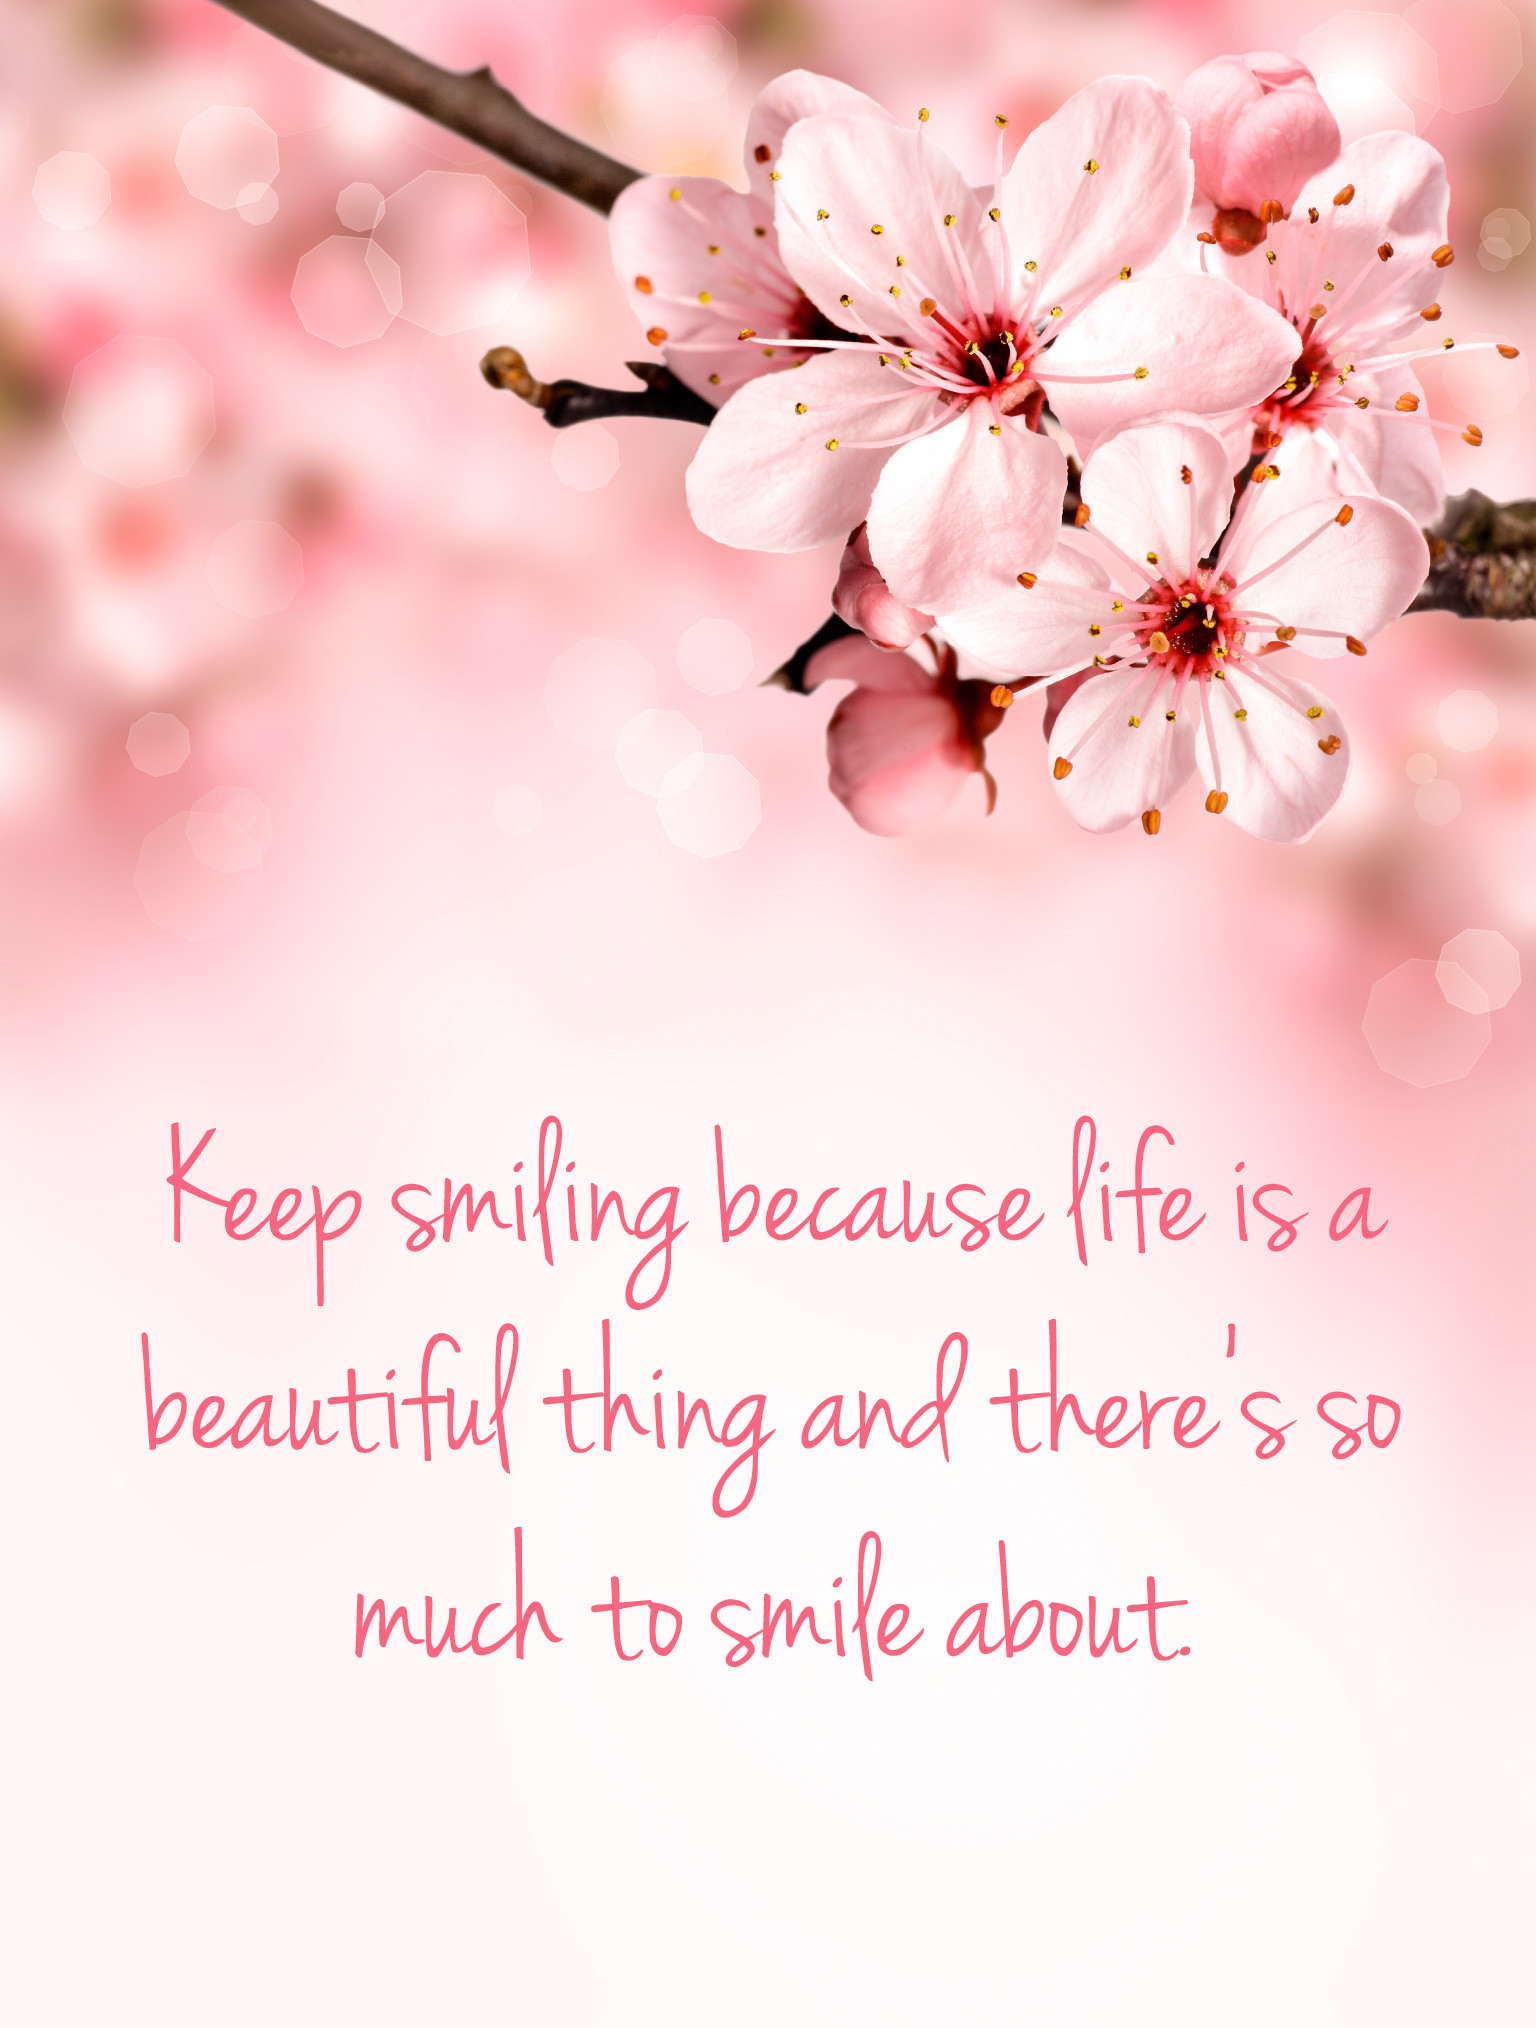 Download The iPad Wallpaper Here Speech On Smile